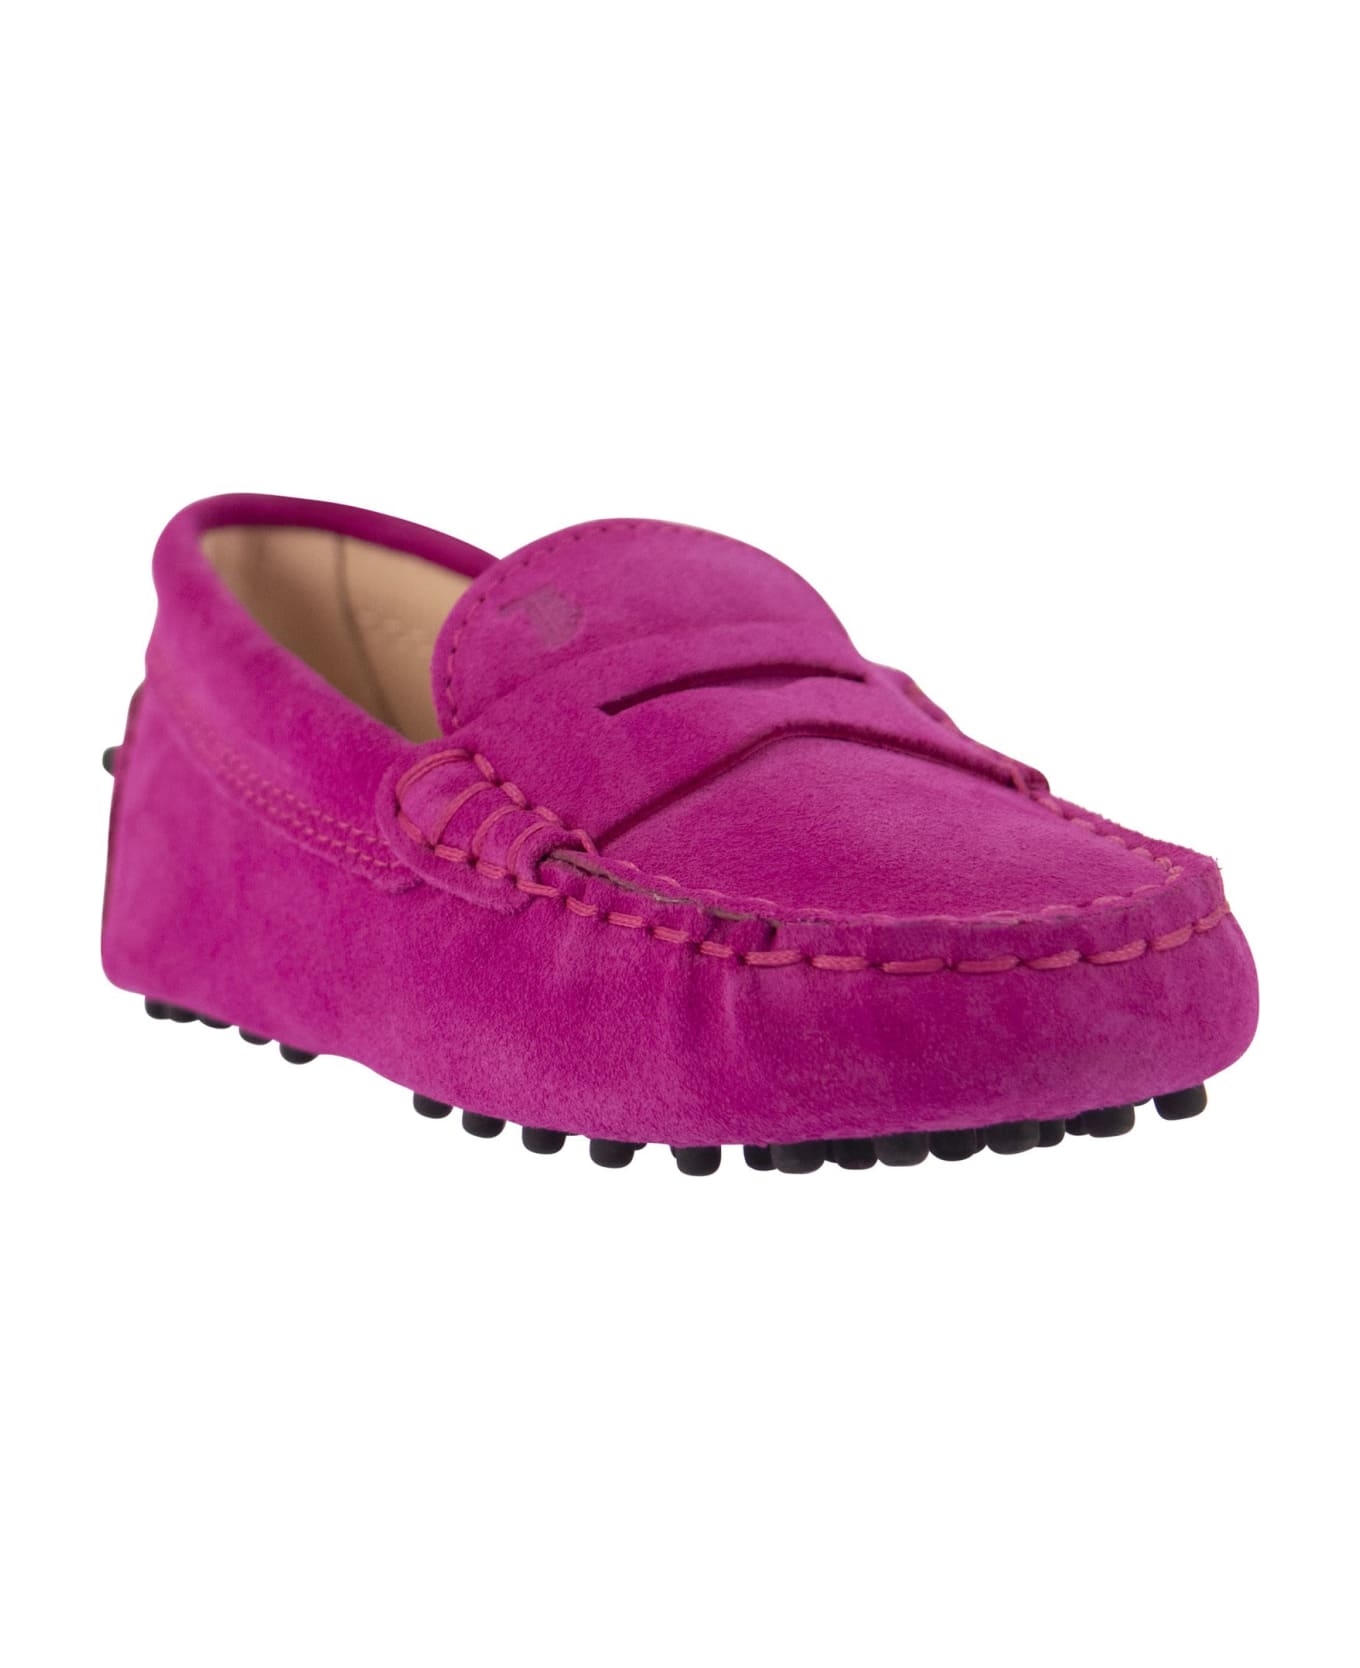 Tod's Suede Loafer - Fuxia シューズ